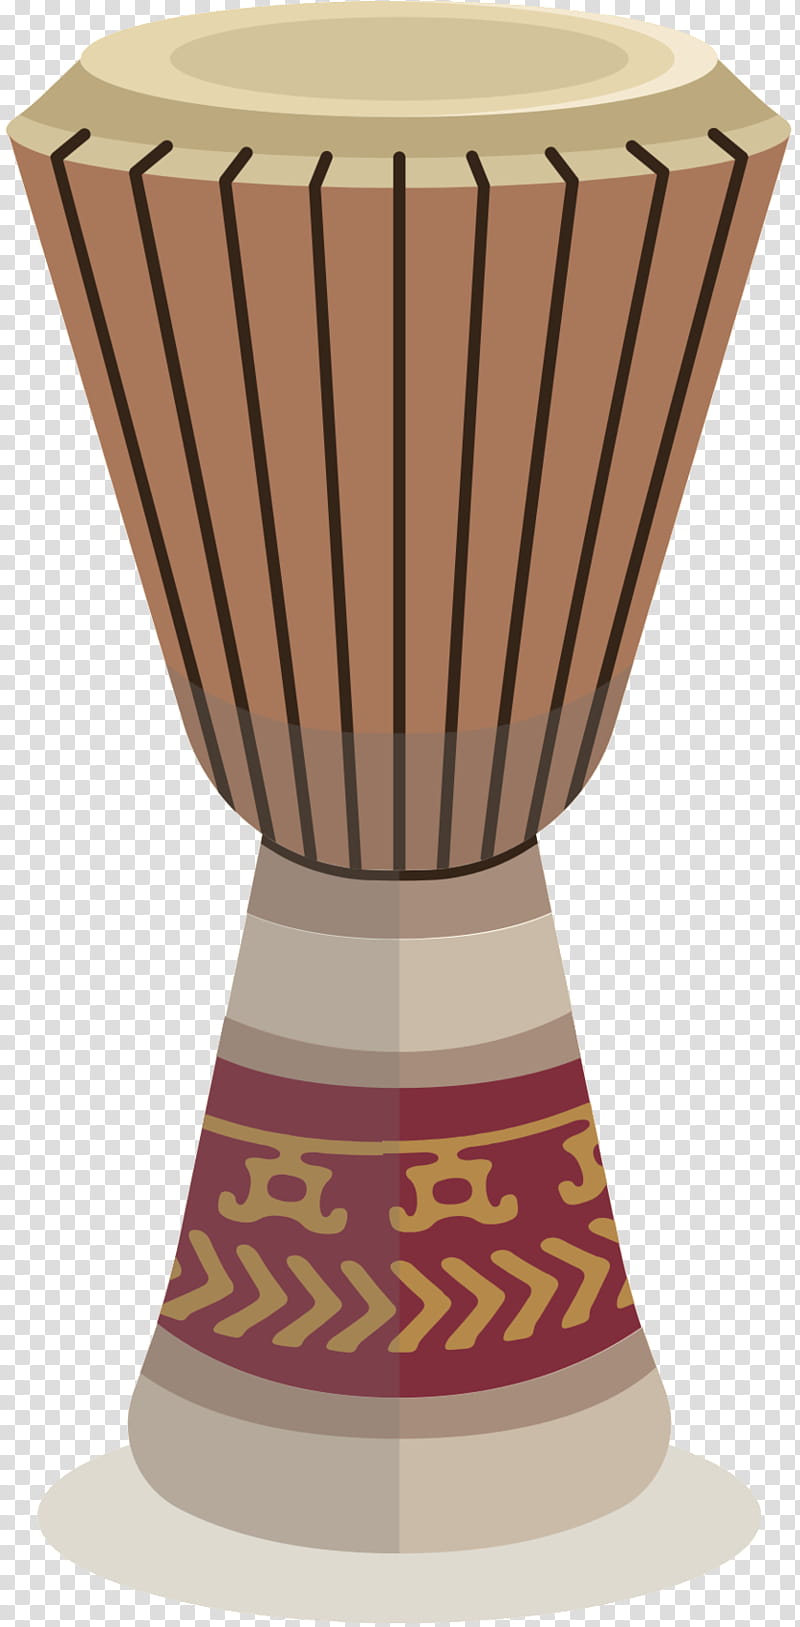 Library, Djembe, Drum, Musical Instruments, Embroidery, Internet, Cartoon, Hand Drum transparent background PNG clipart